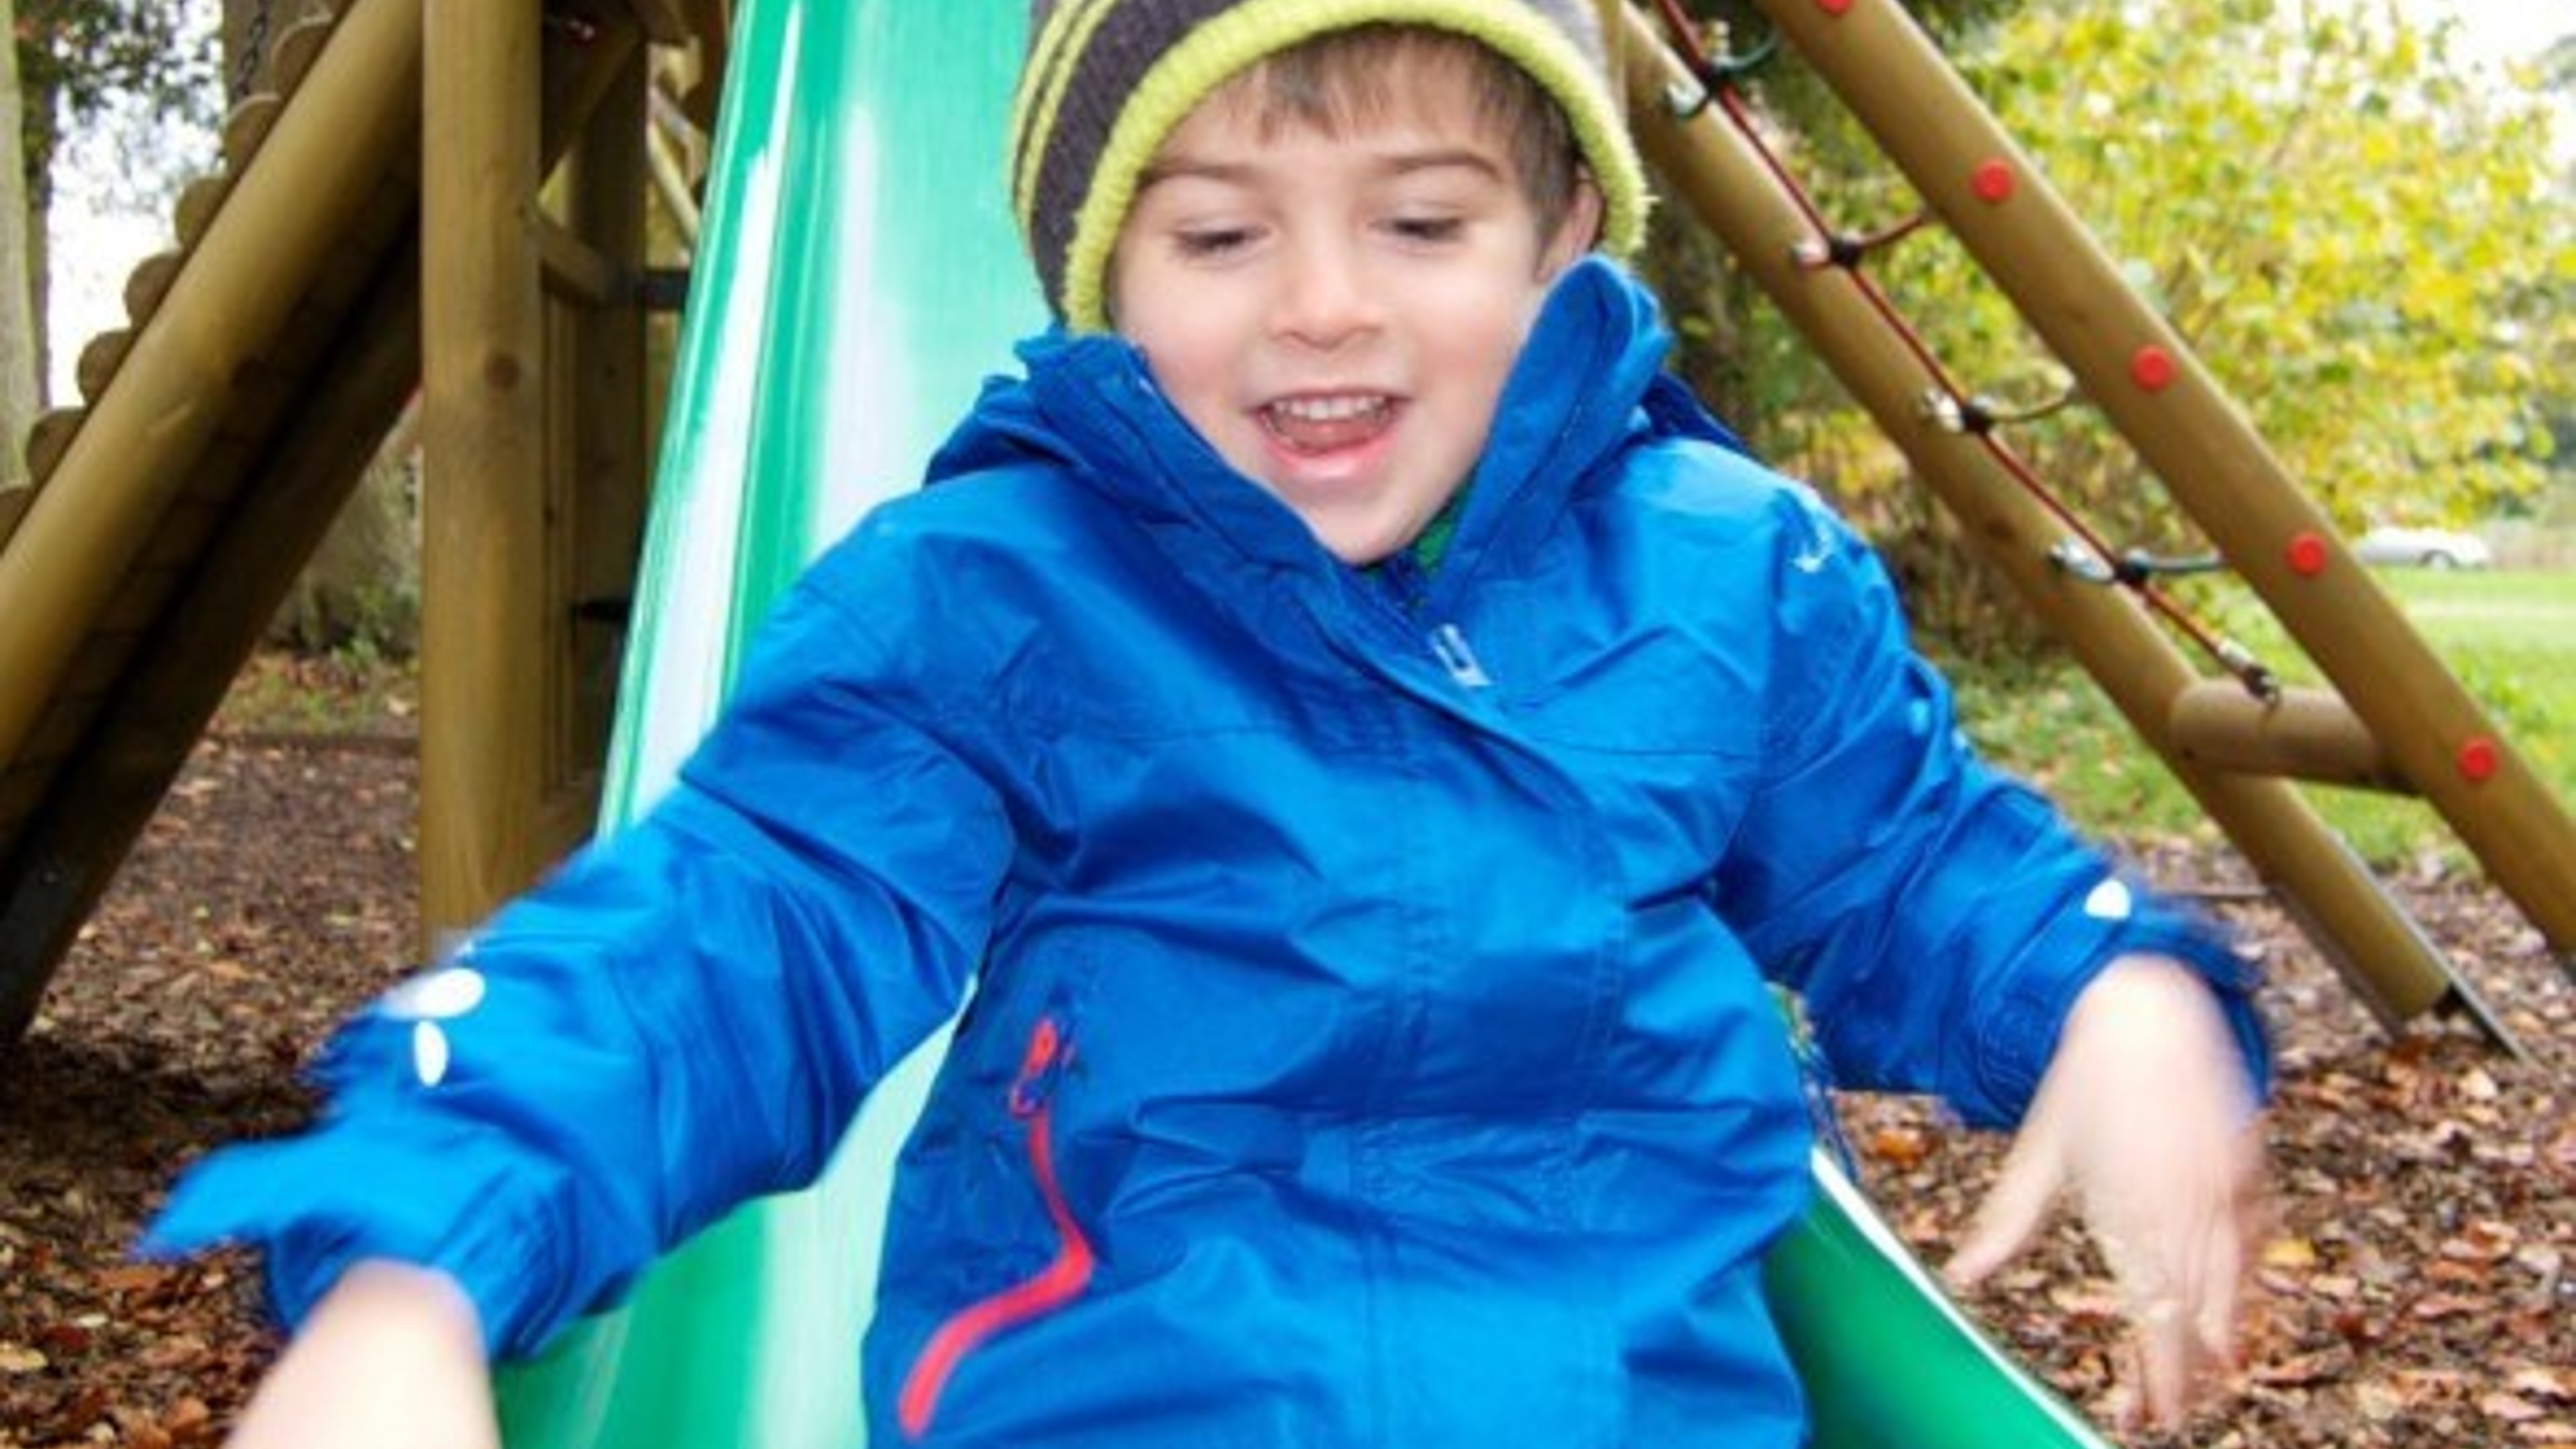 Sliding down a slide - Photo taken by Get Out With The Kids at NT Dudmaston Hall